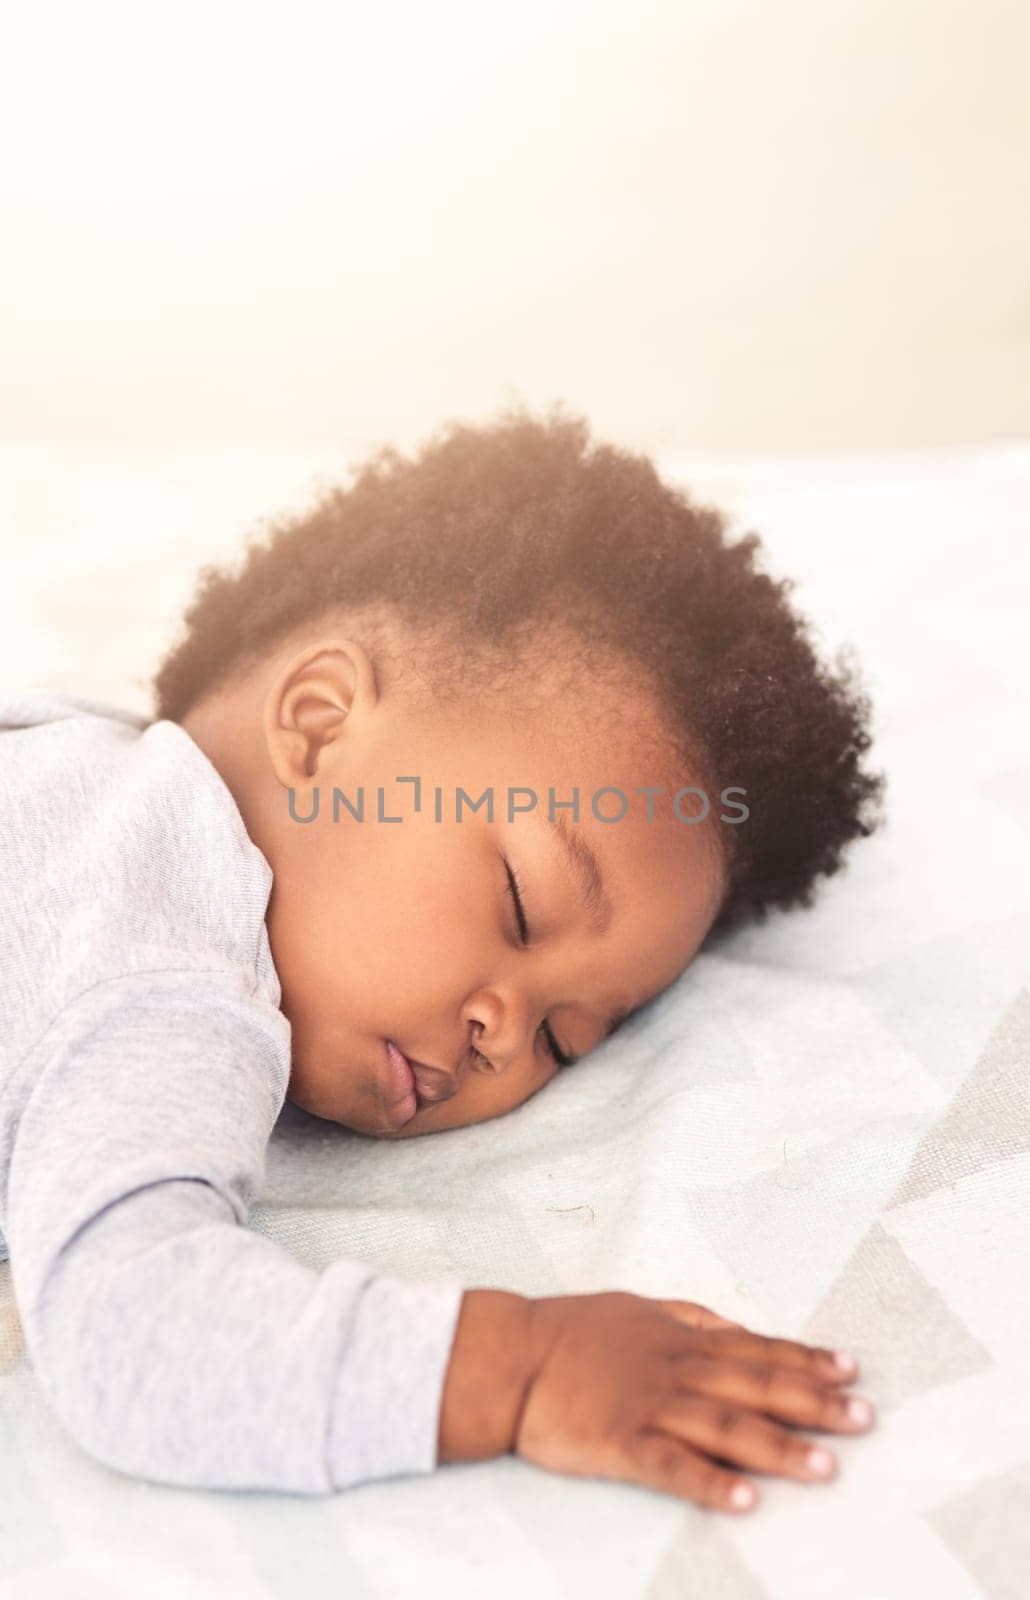 Cute, bed and baby sleeping in home on blanket for rest, nap time and dreaming in nursery. Childcare, newborn and adorable, tired and African child in bedroom sleep for comfort, relaxing and calm.